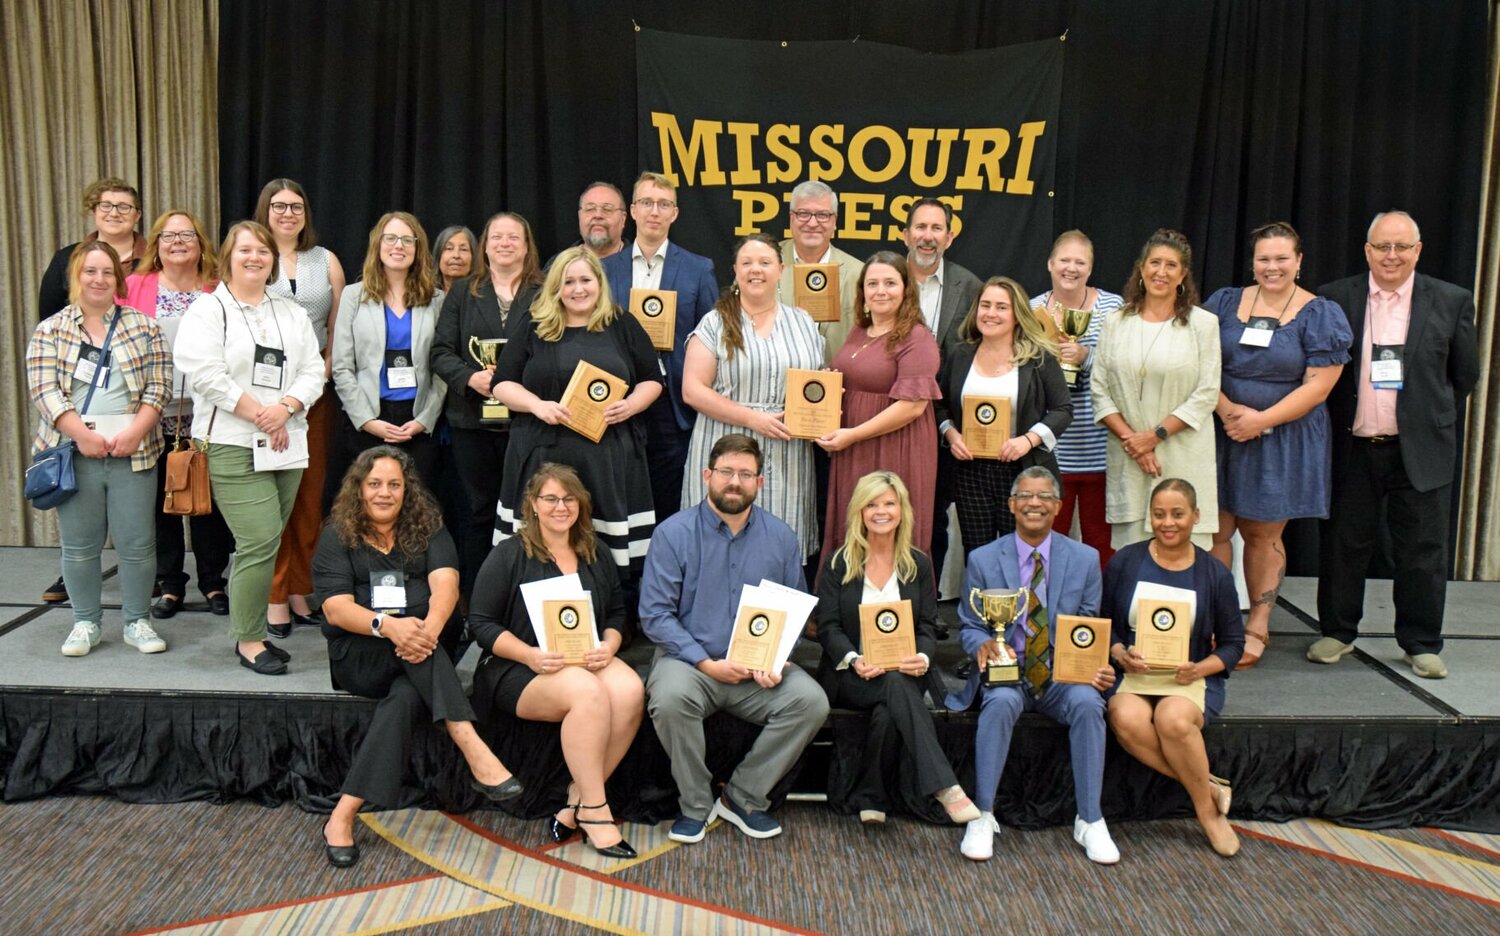 Staff members from the weekly newspapers present at the Missouri Press Association awards luncheon pose for a photo Saturday, Sept. 23.